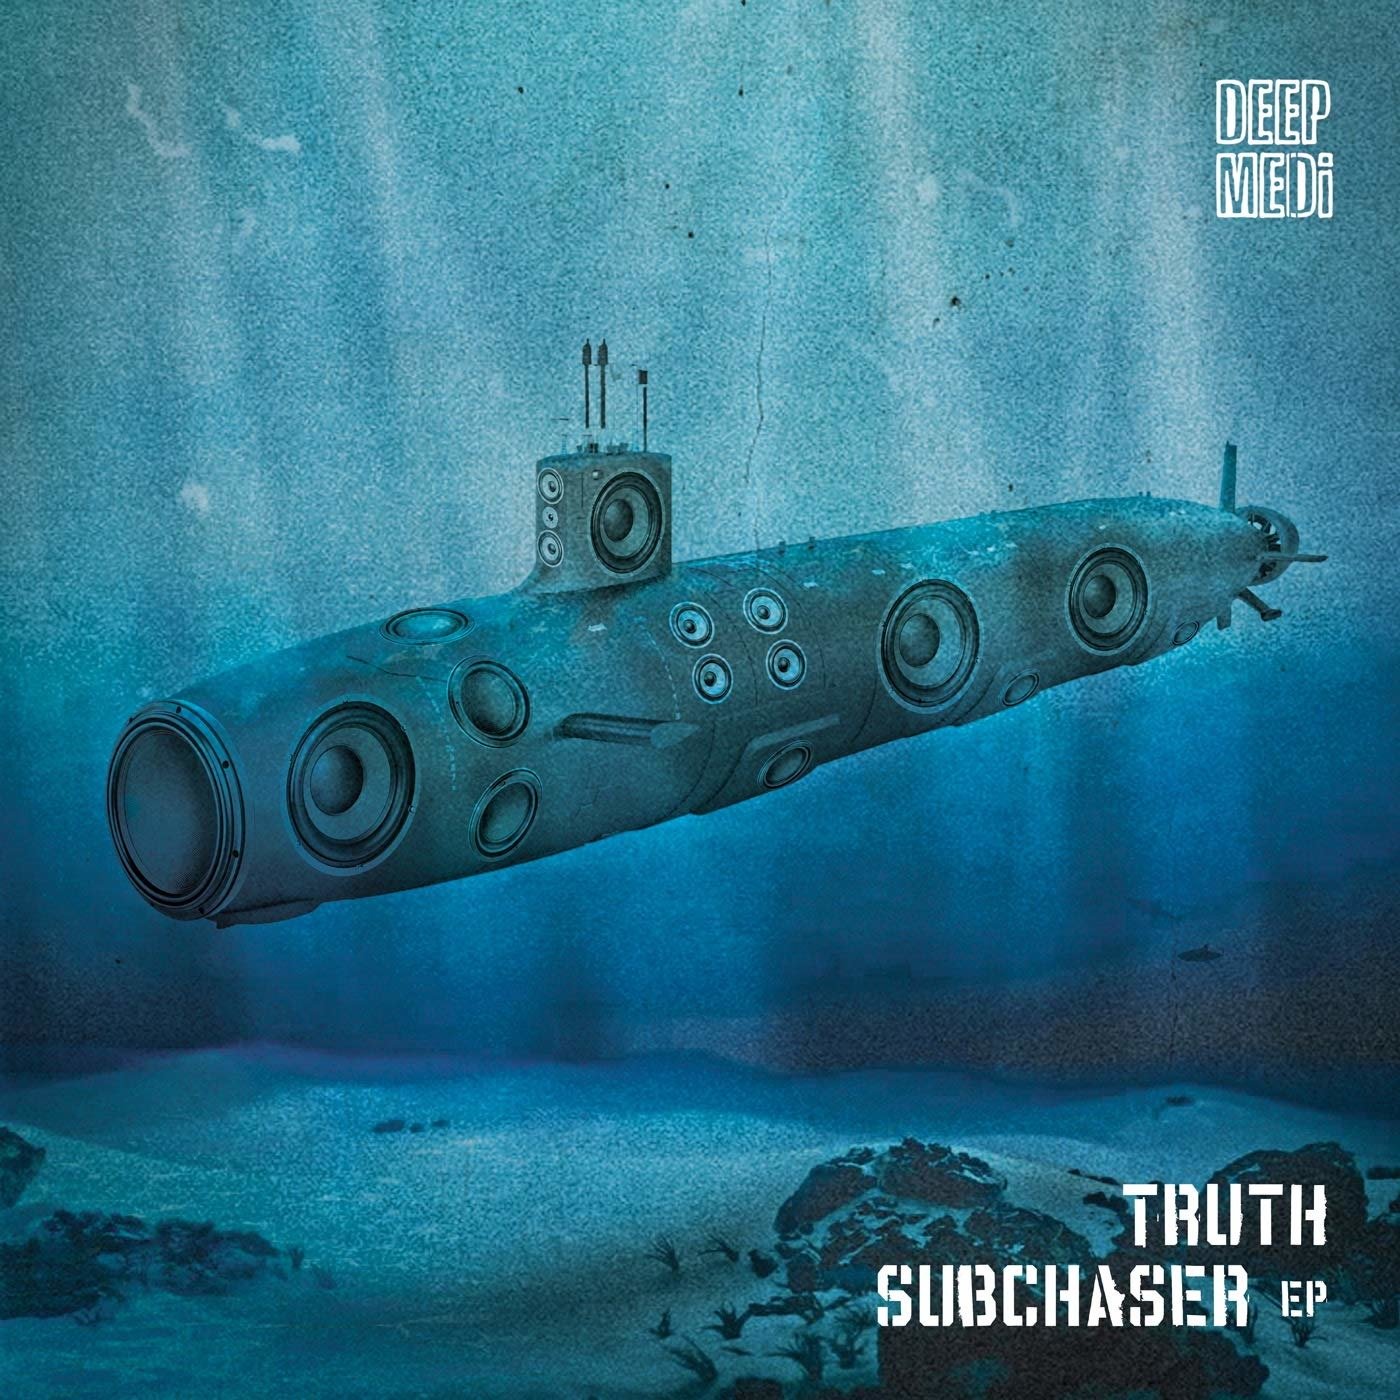 CD Shop - TRUTH SUBCHASER EP